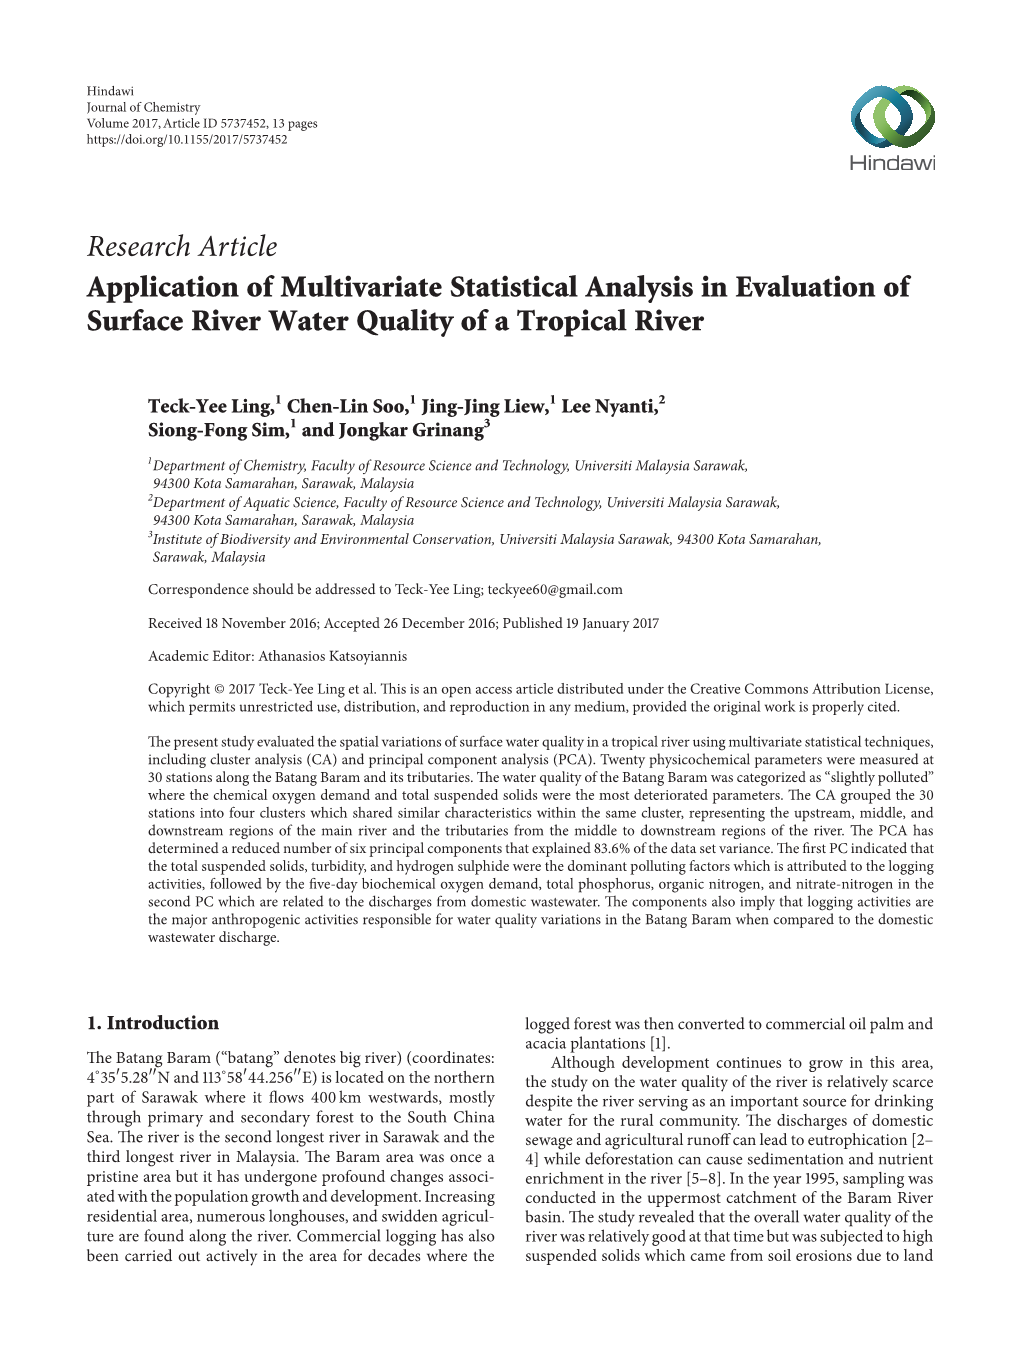 Application of Multivariate Statistical Analysis in Evaluation of Surface River Water Quality of a Tropical River